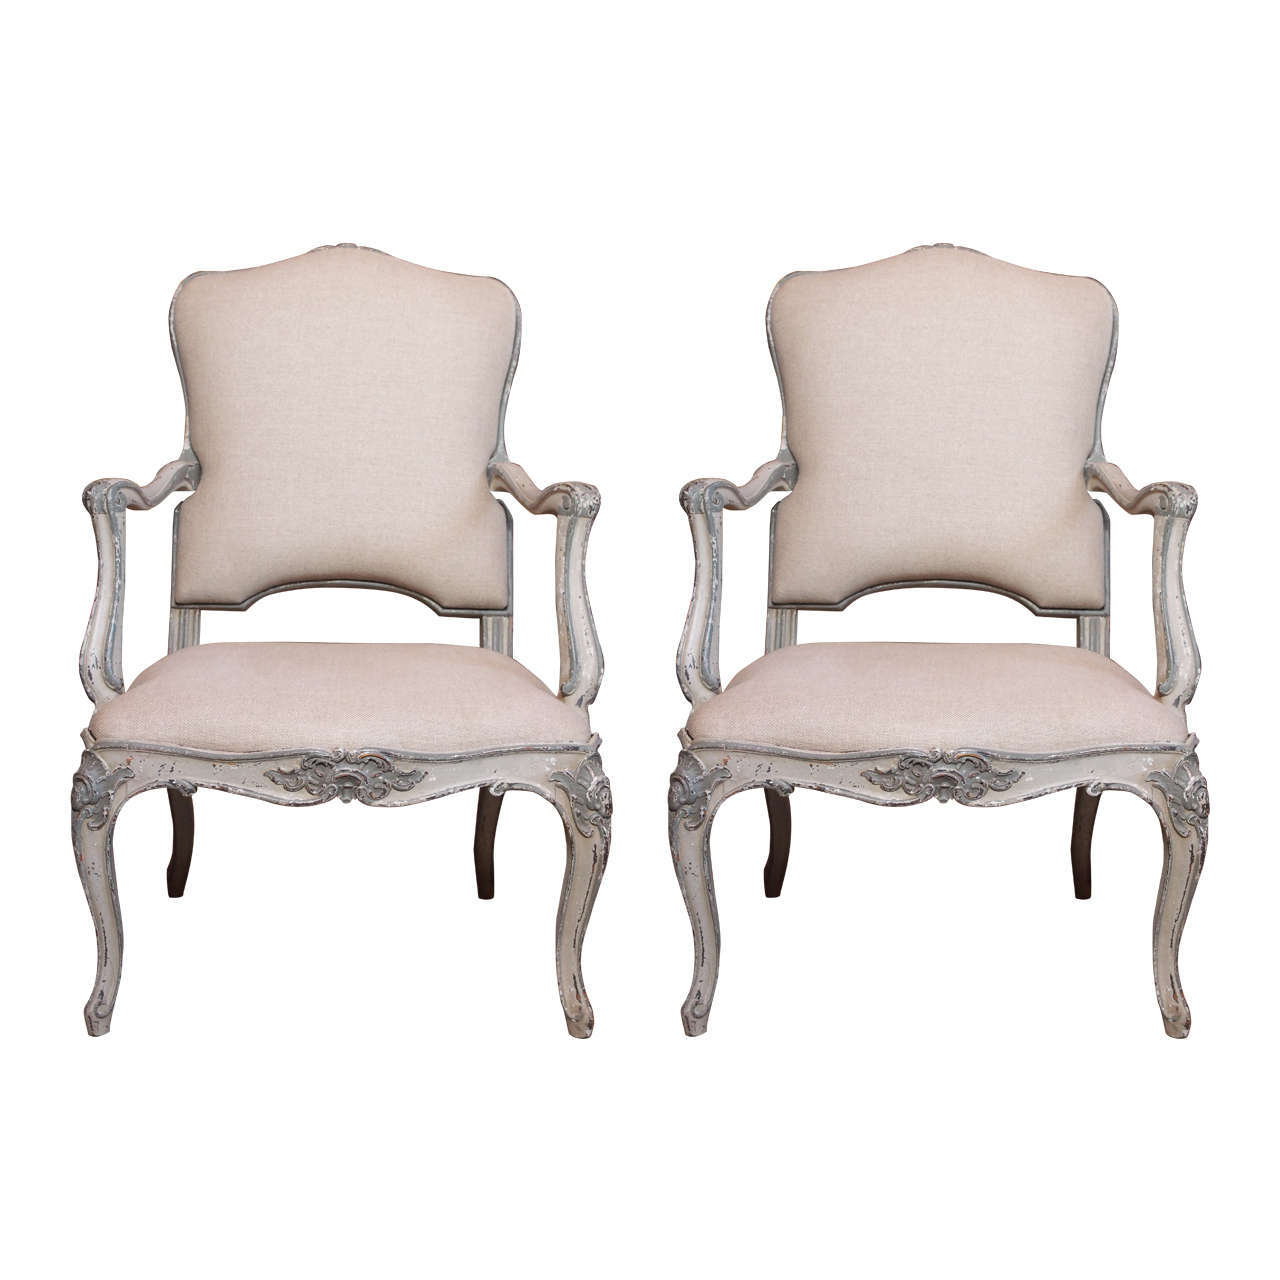 Pair of 19th Century Painted Italian Armchairs For Sale